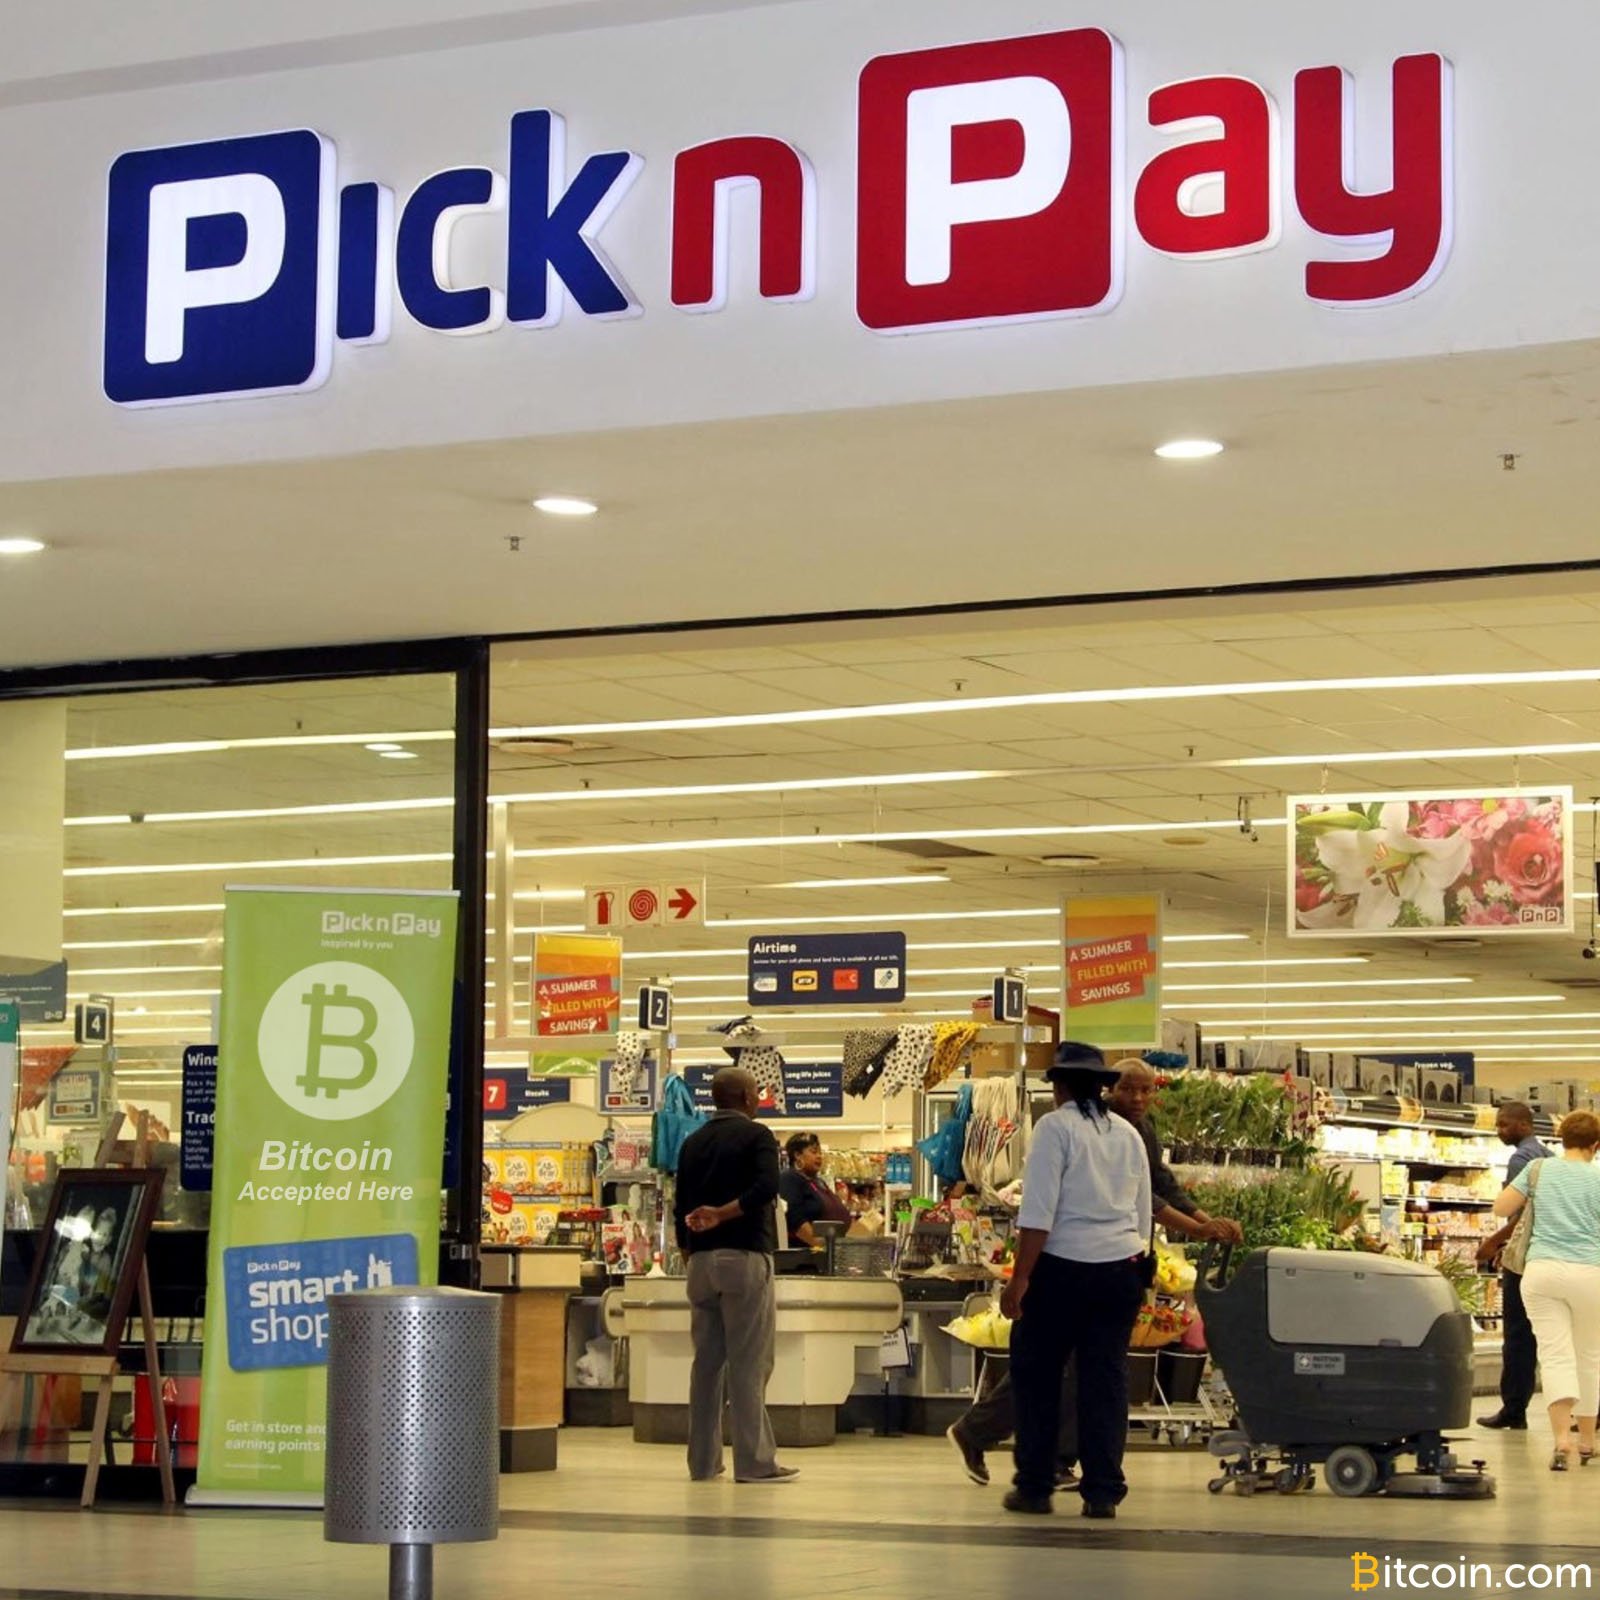 South Africa's Second Largest Supermarket Chain Pick n Pay Trials Bitcoin Payments